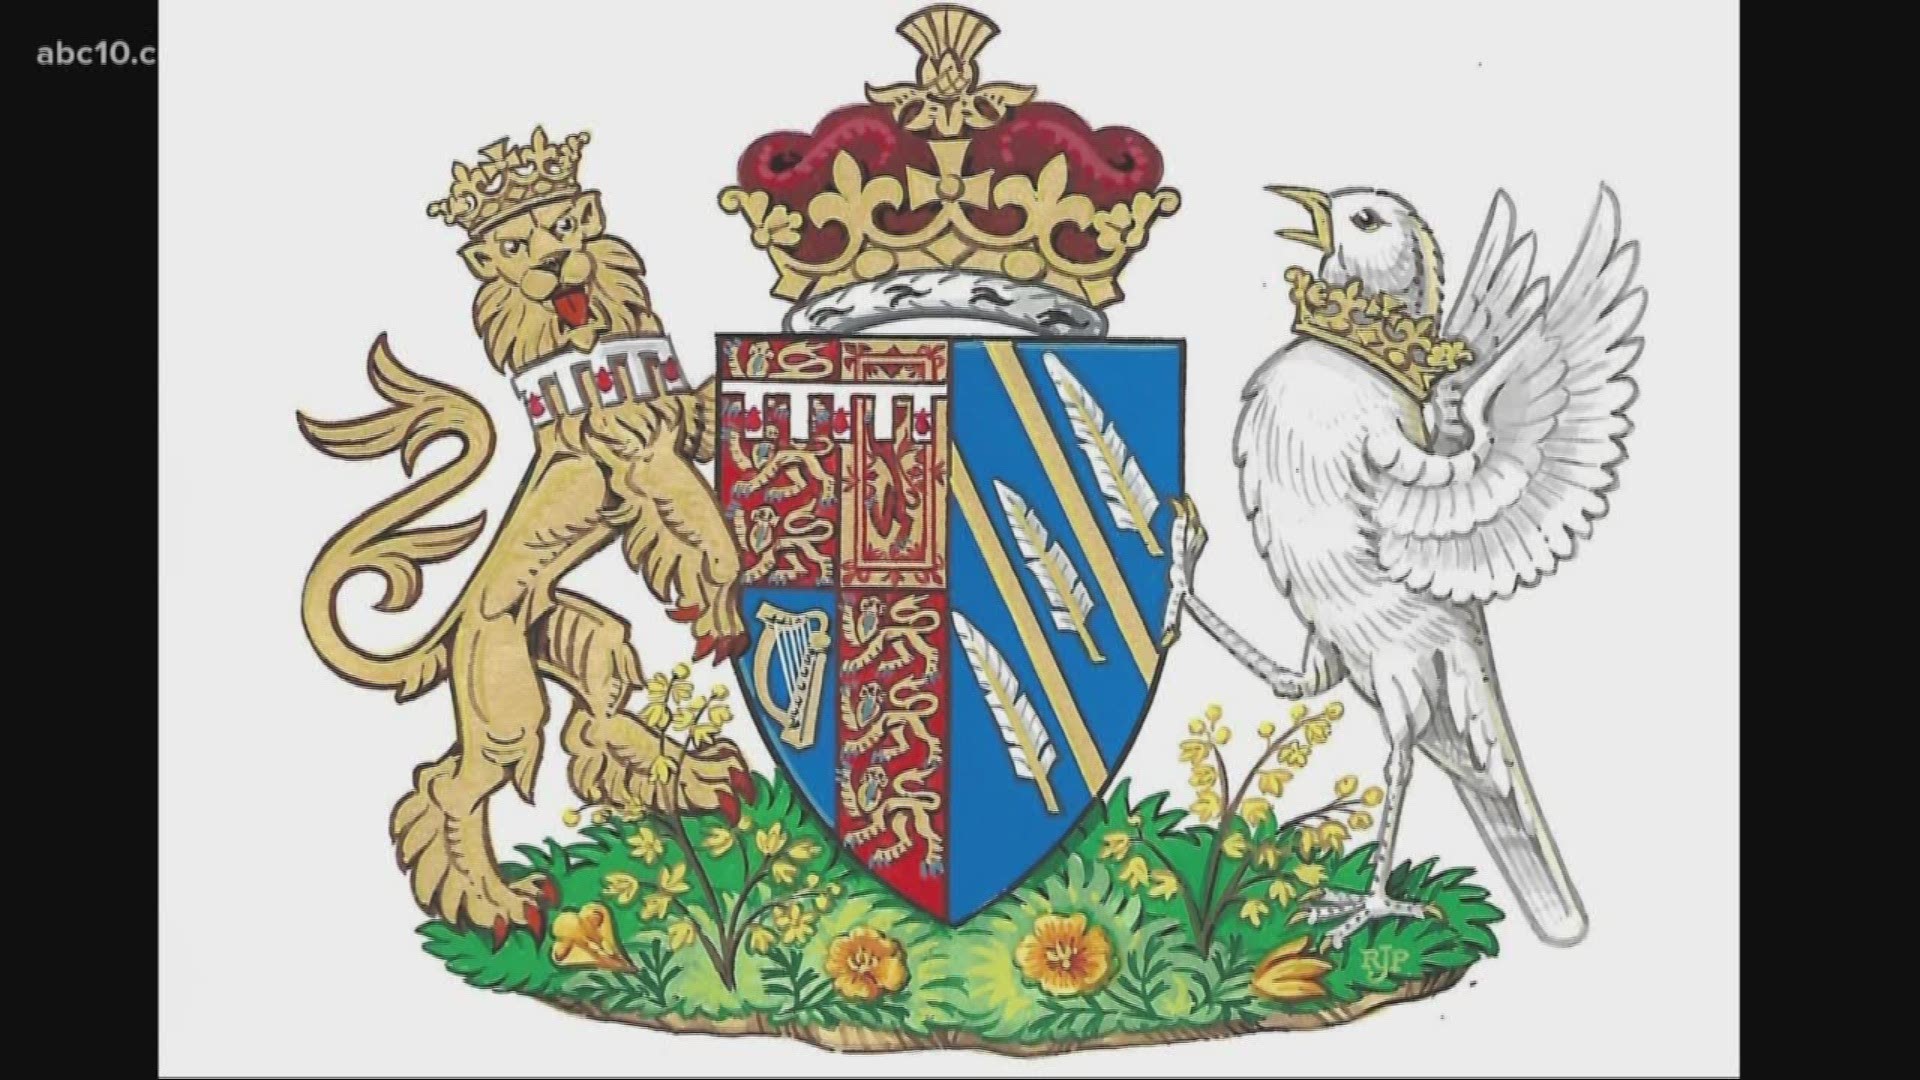 California references found in Meghan Markle coat of arms